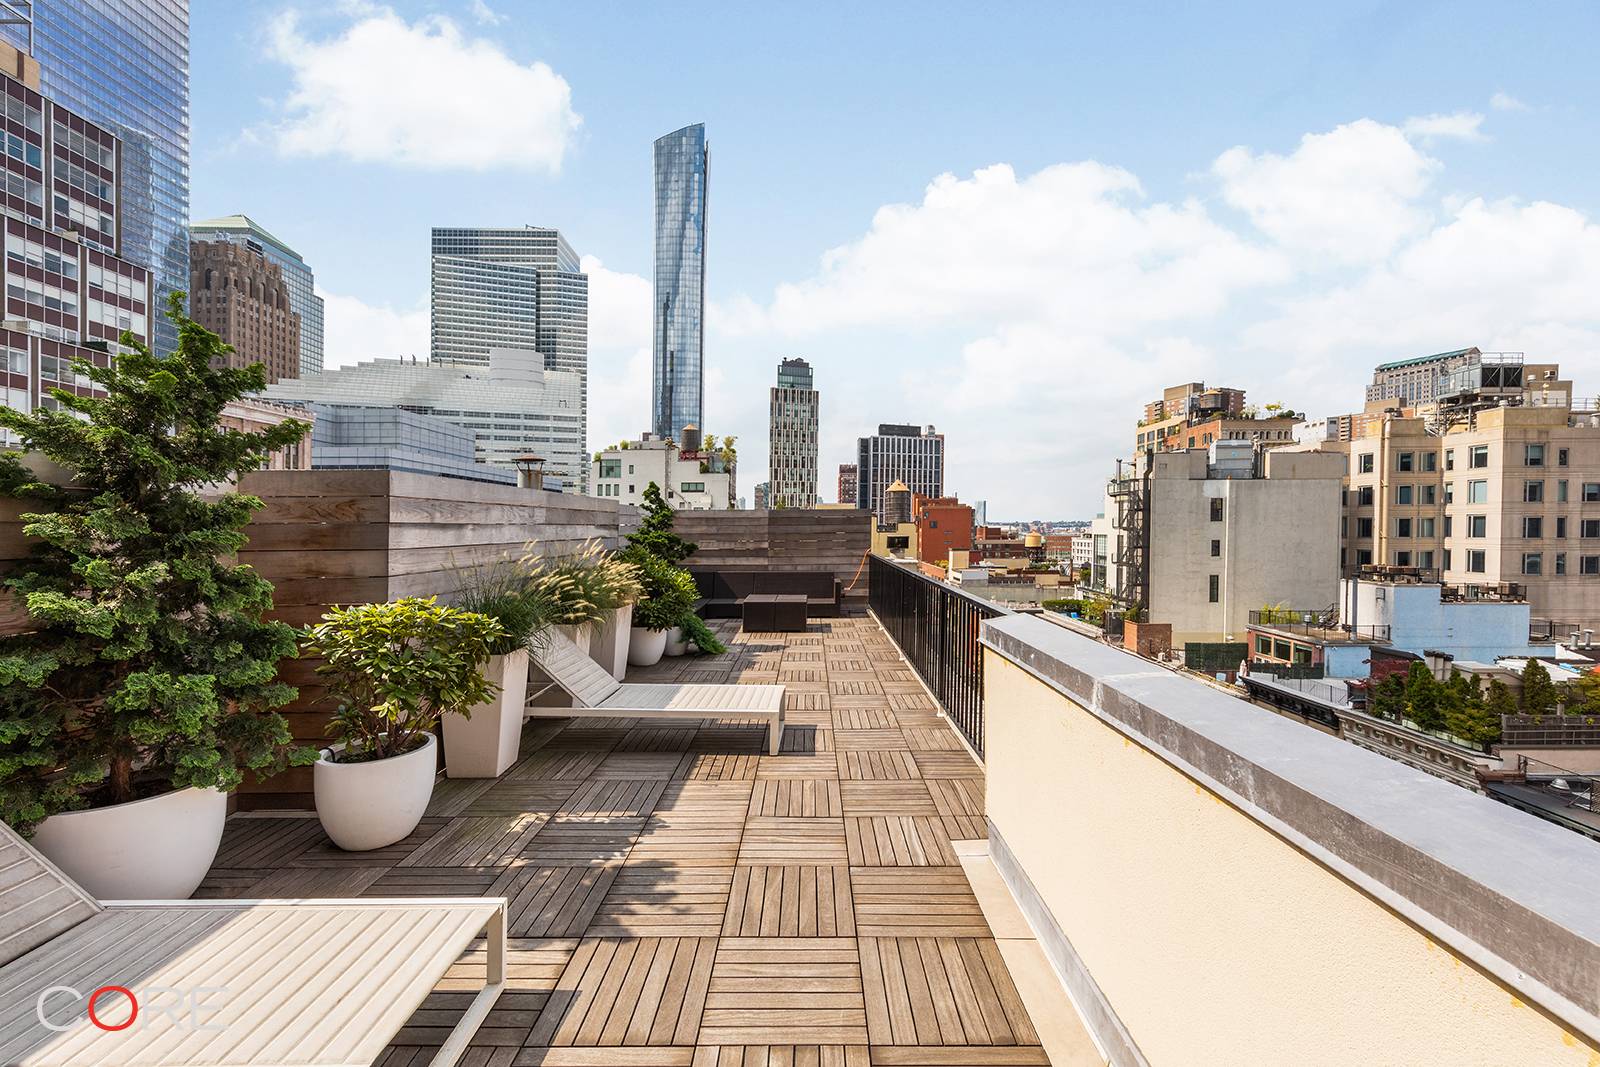 Located in the heart of Tribeca and completely re designed by the Turett Collaborative, the Penthouse at 41 Warren Street is the perfect canvas for leisure and entertainment.